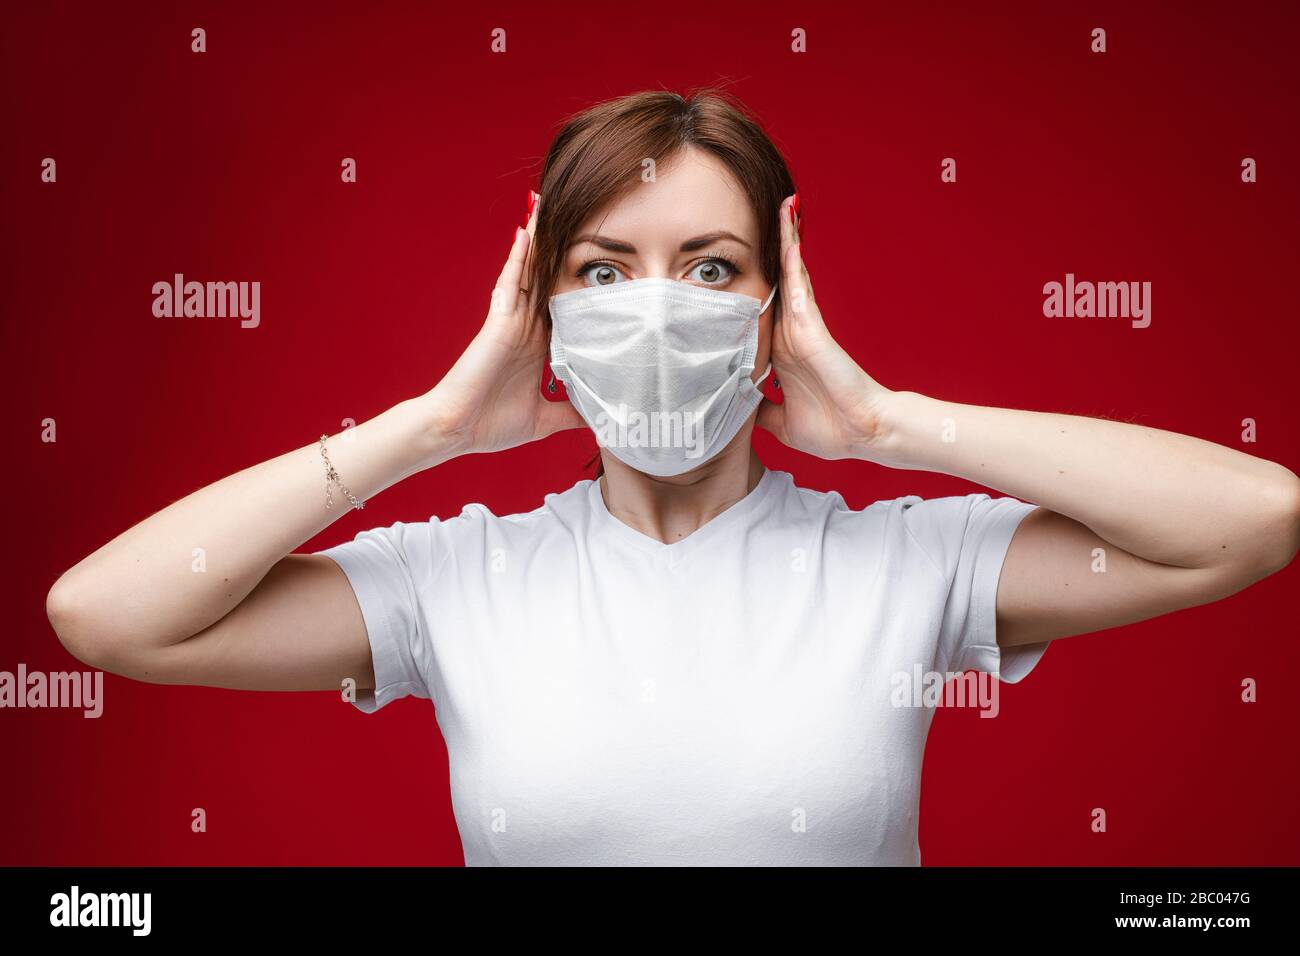 Woman in mask is shocked with hands at ears. Stock Photo